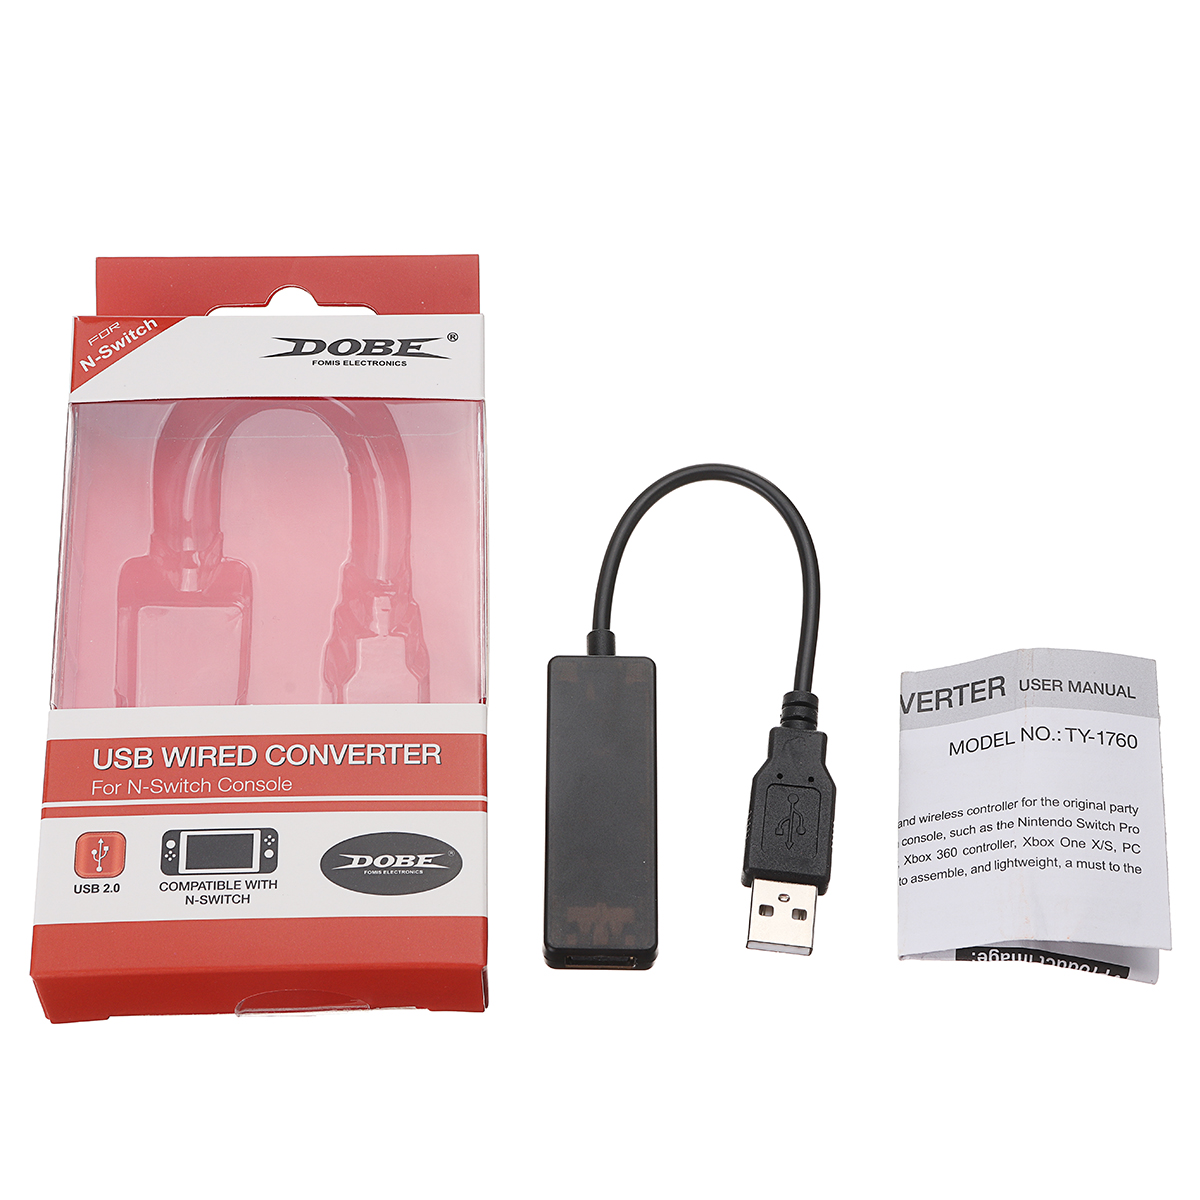 DOBE-TY-1760-bluetooth-USB-Wired-Converter-for-N-Switch-Console-Handle-Gamepad-Connector-1306060-6